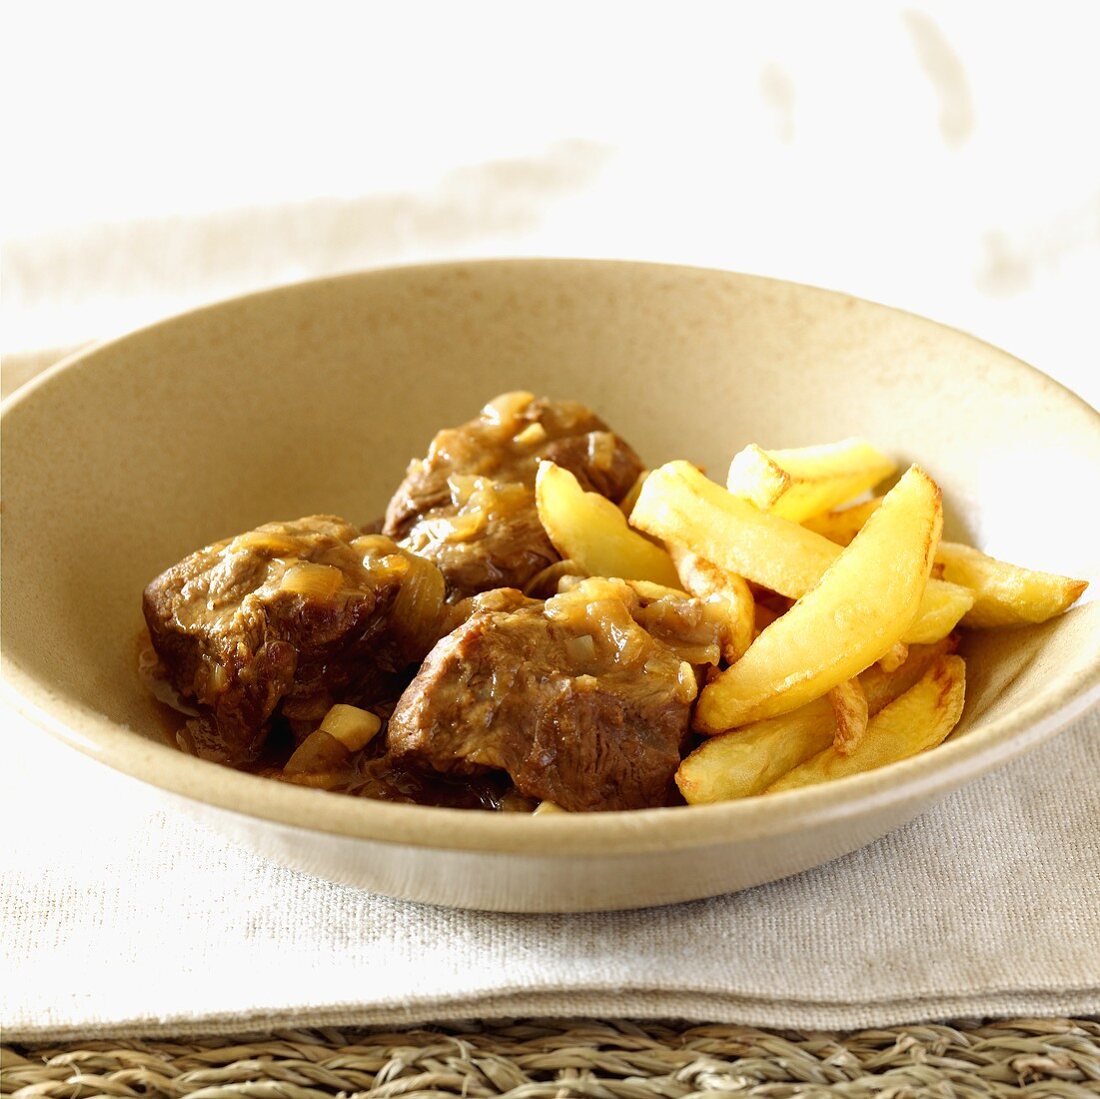 Beef stew with beer and chips